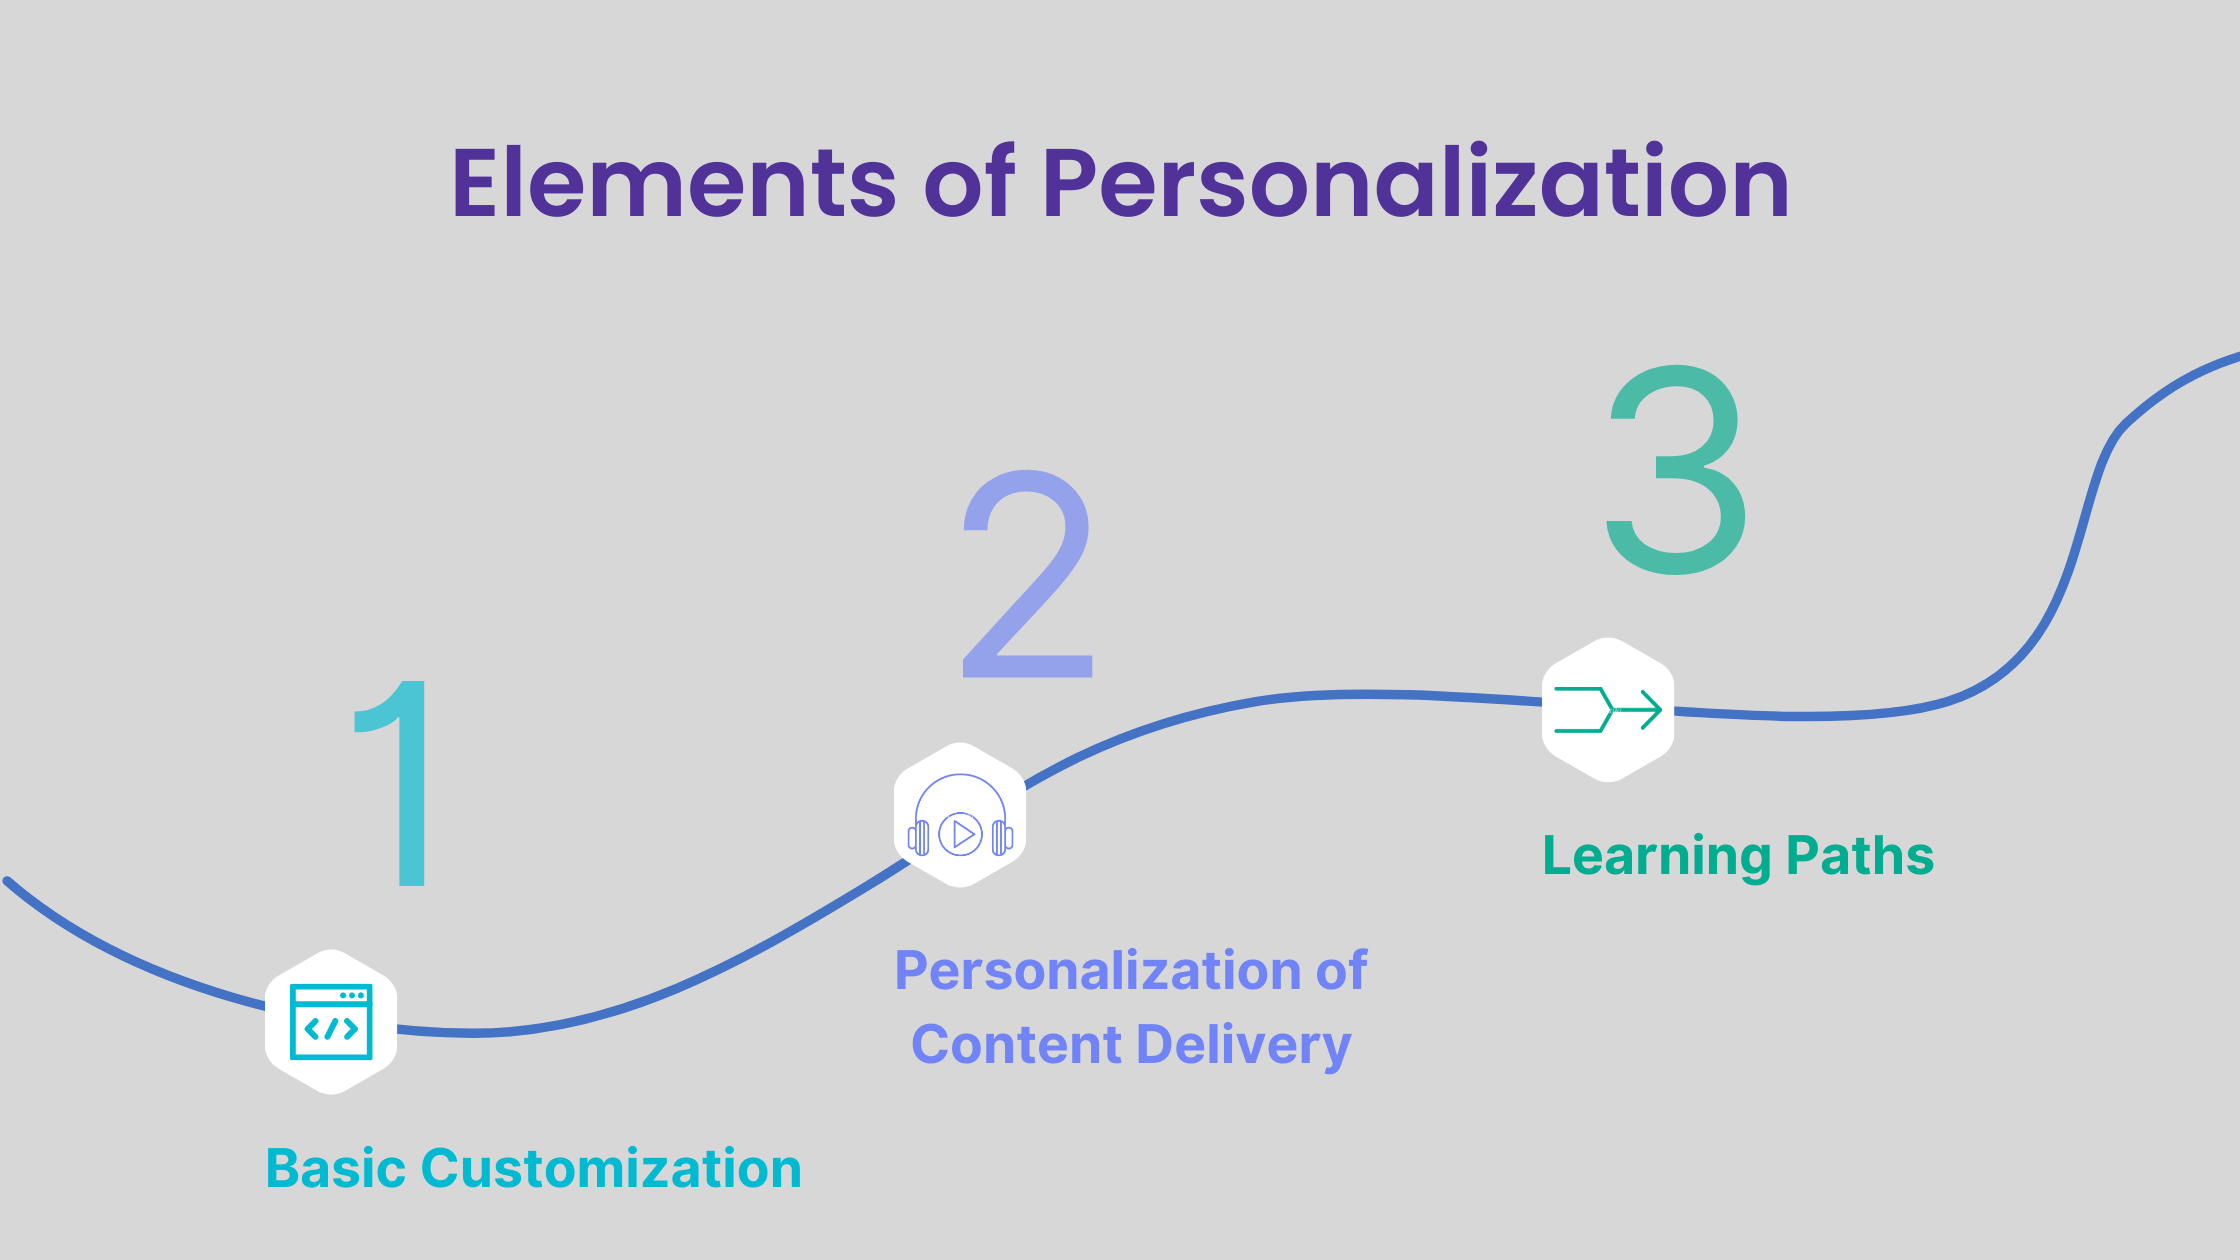 Elements of personalization